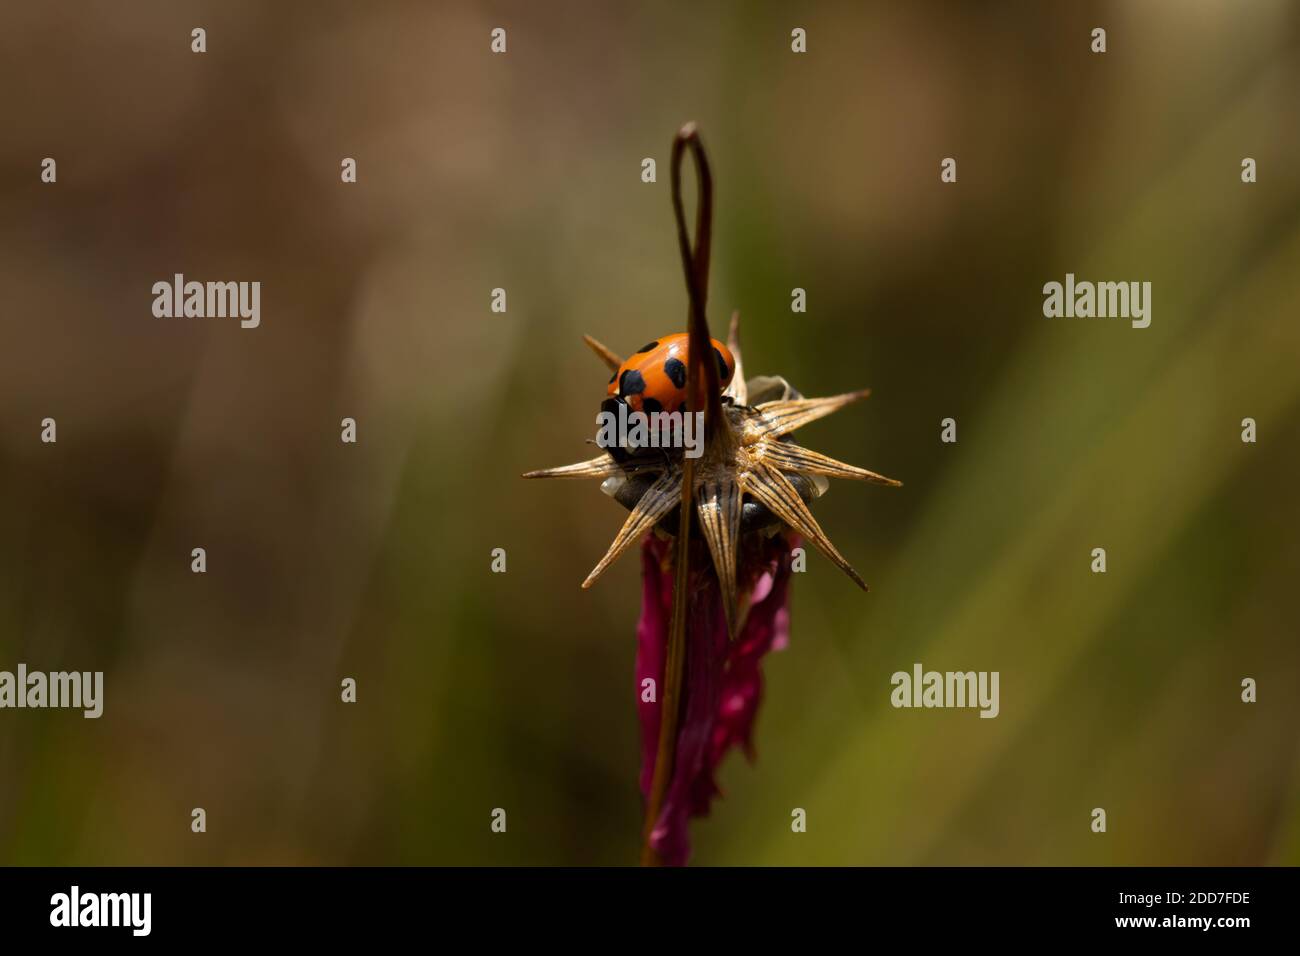 Orange ladybug standing over the dry sepals of a flower Stock Photo